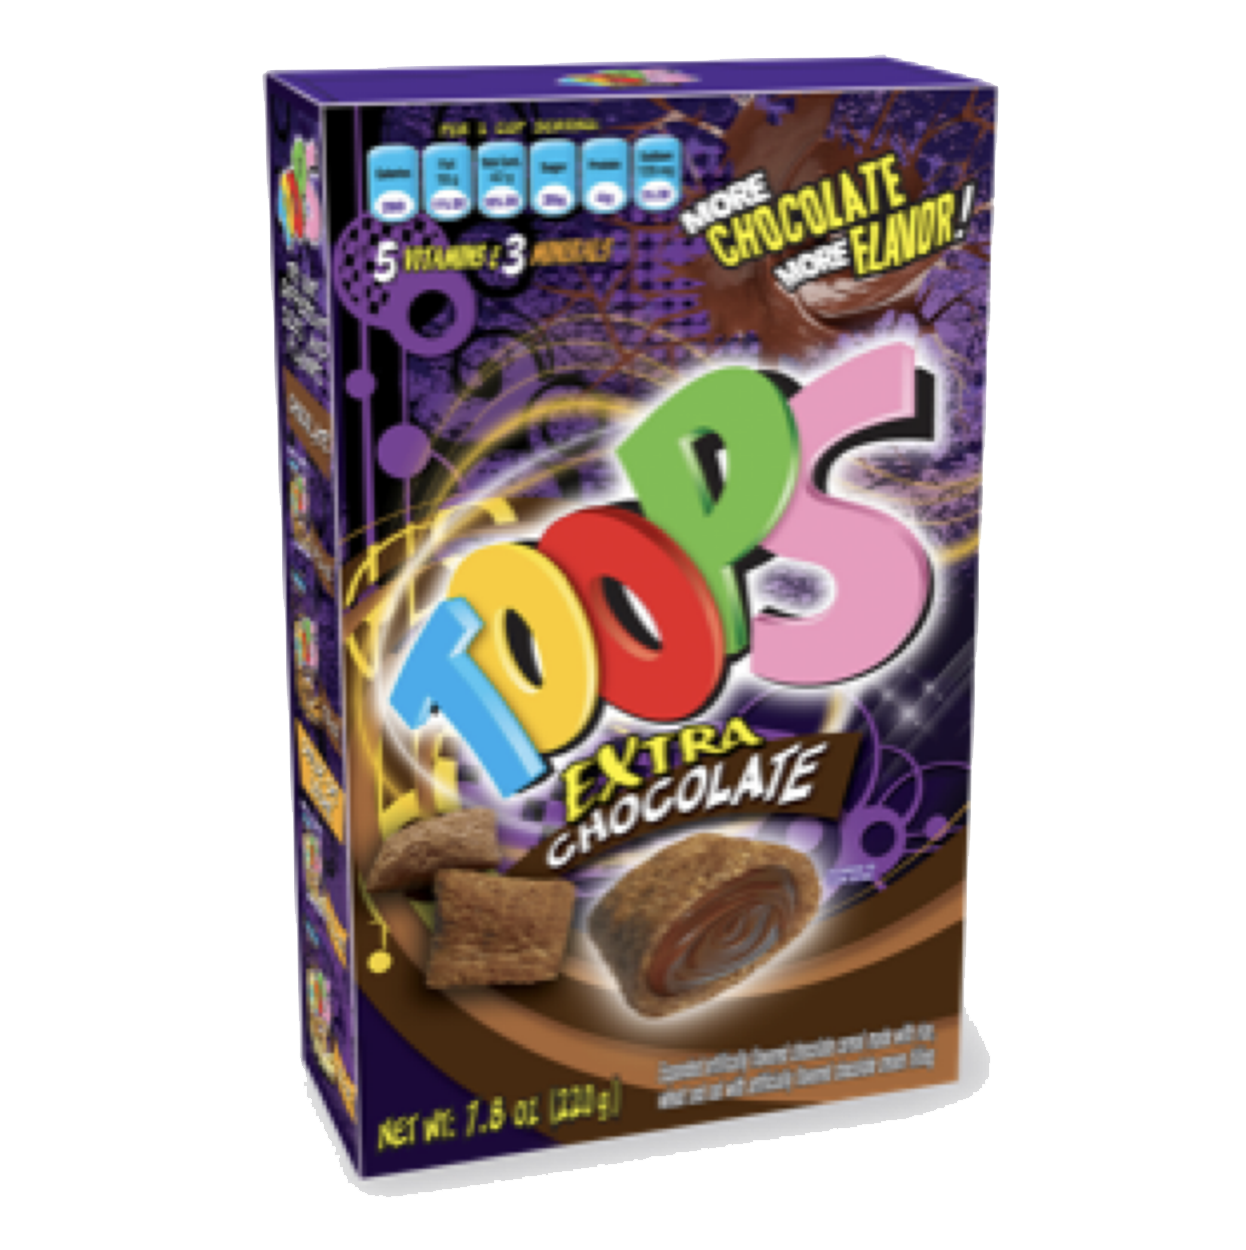 Toops Cereal 7.08 Oz